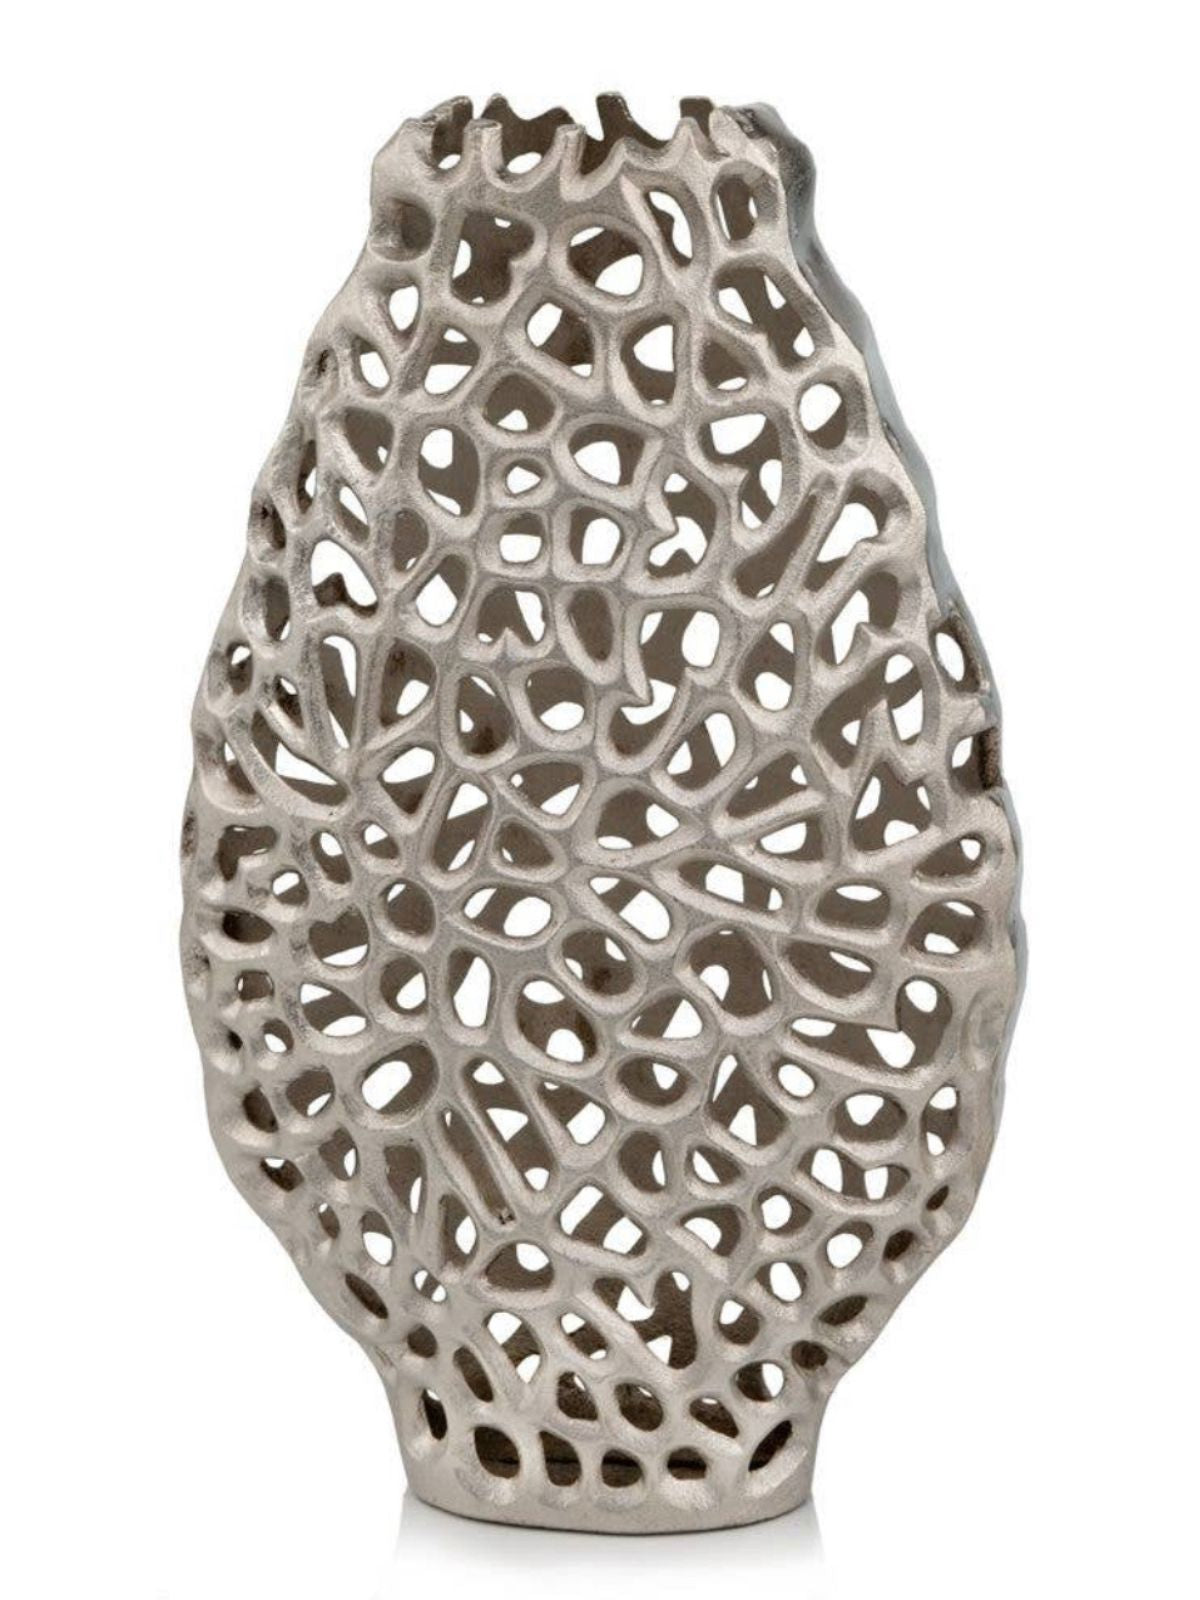 18 inch Shiny Nickel Coral Design Table Vase, Sold by KYA Home Decor.